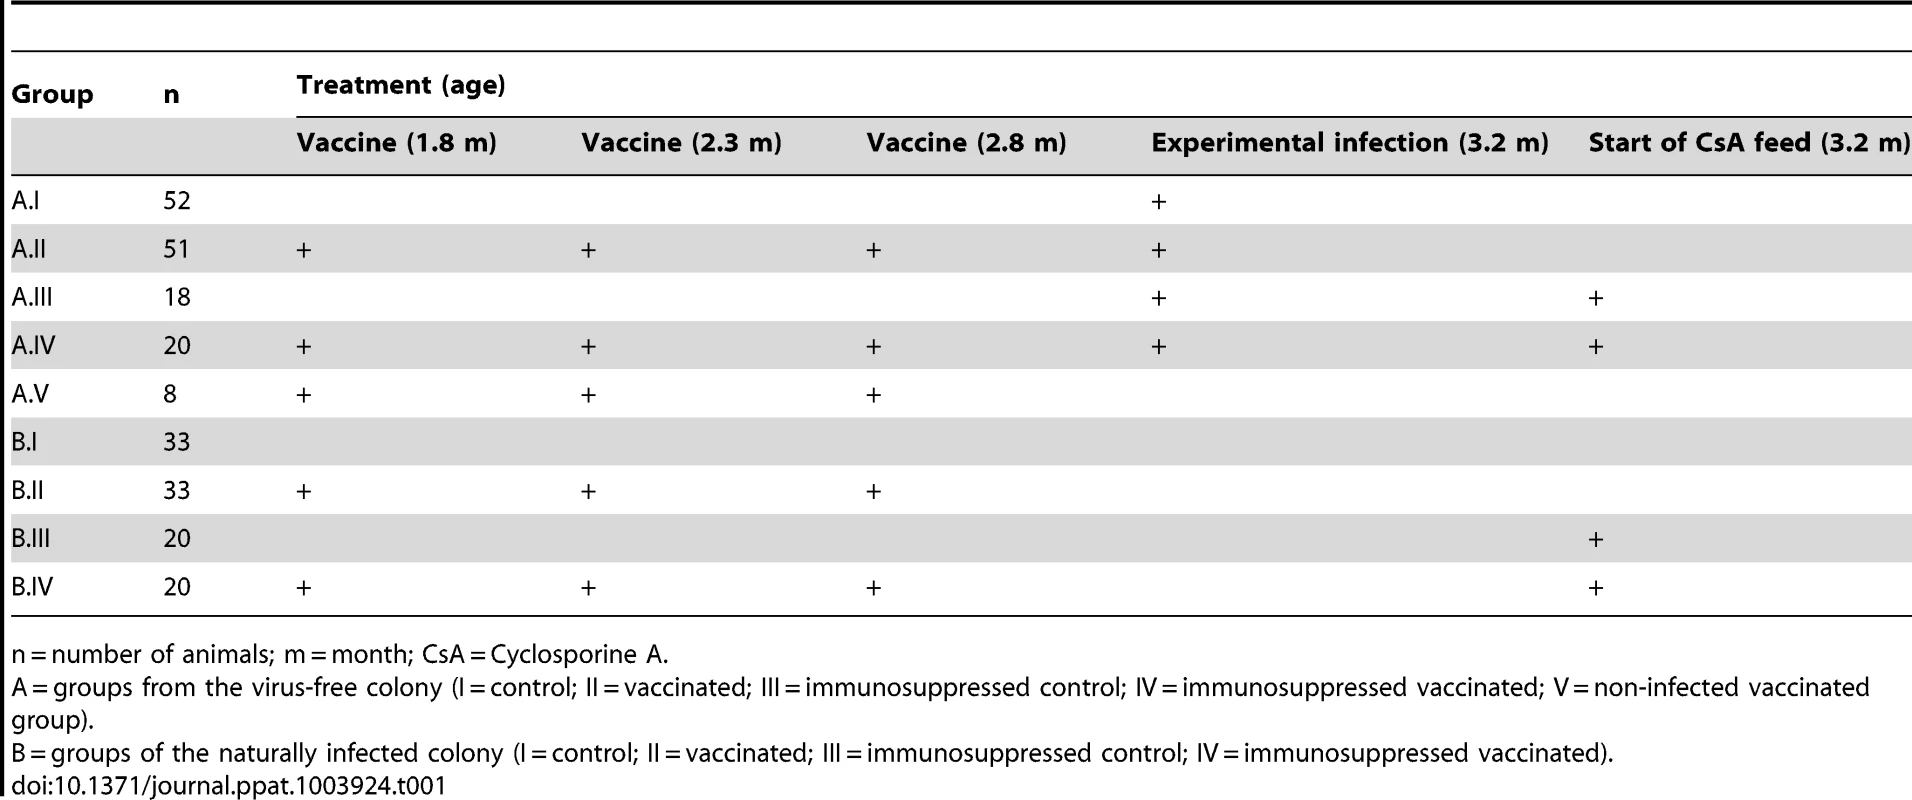 Overview of the vaccination study.